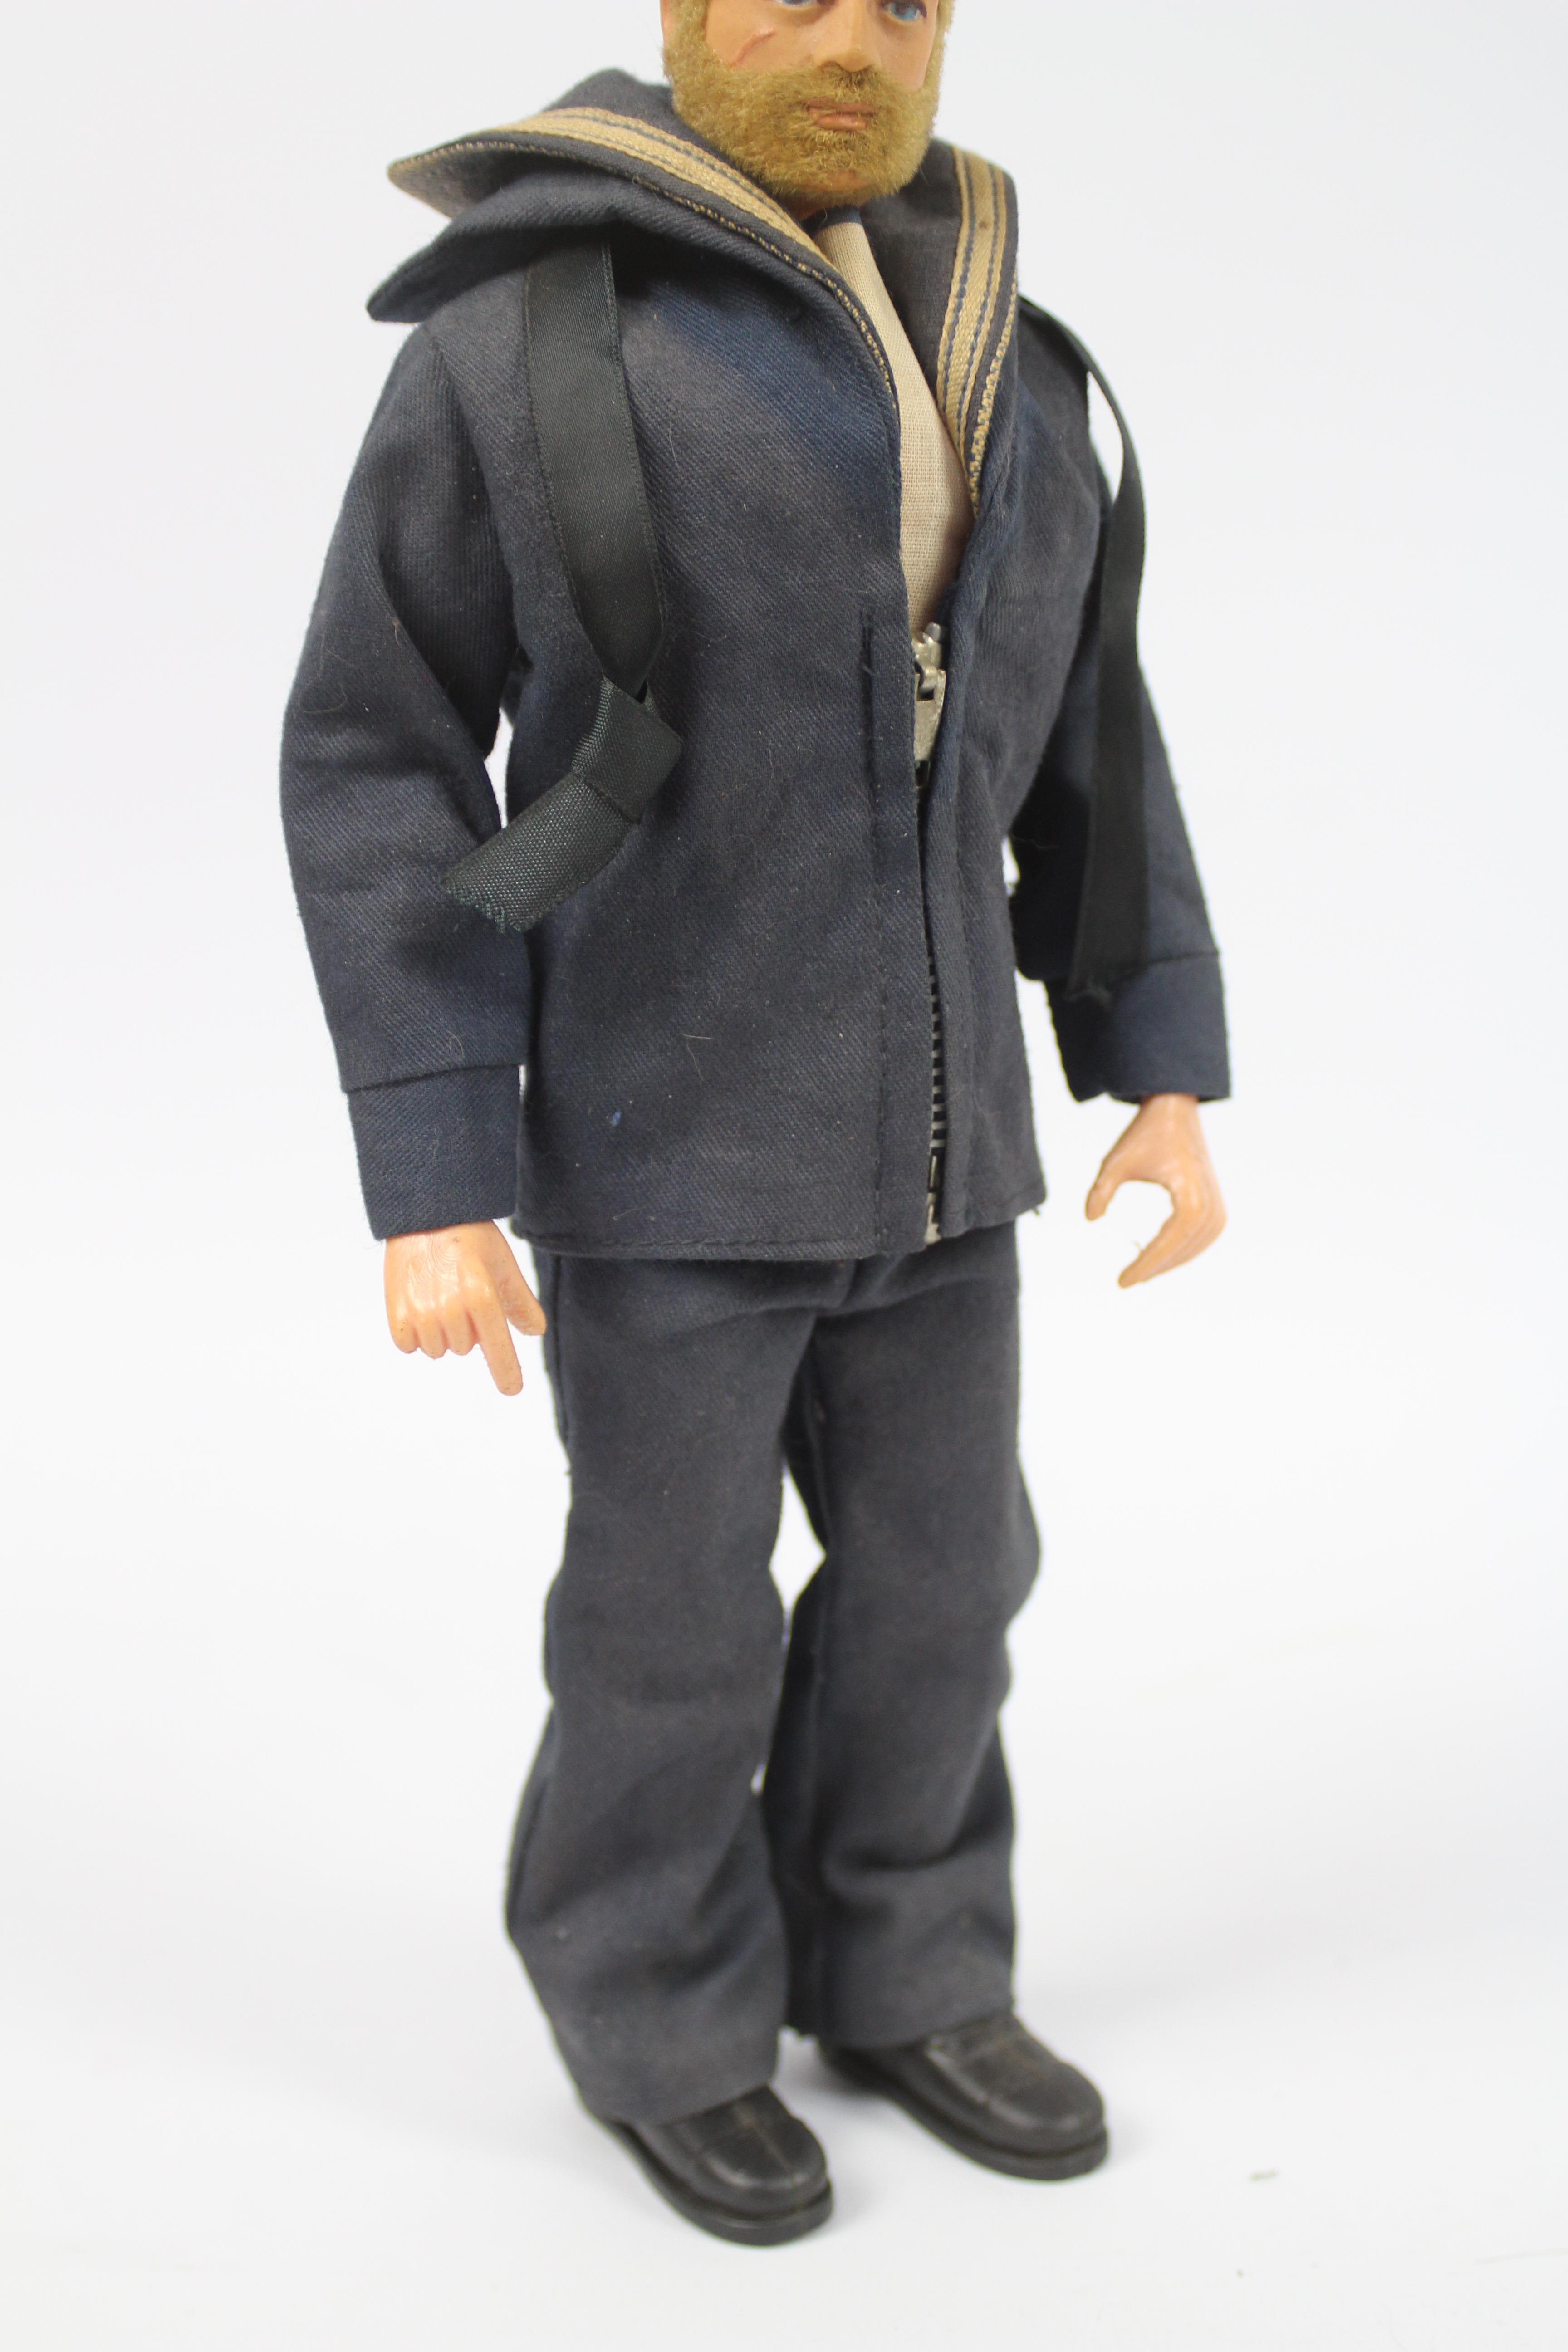 Palitoy, Action Man - A Palitoy Action Man figure in Sailor outfit. - Image 3 of 4